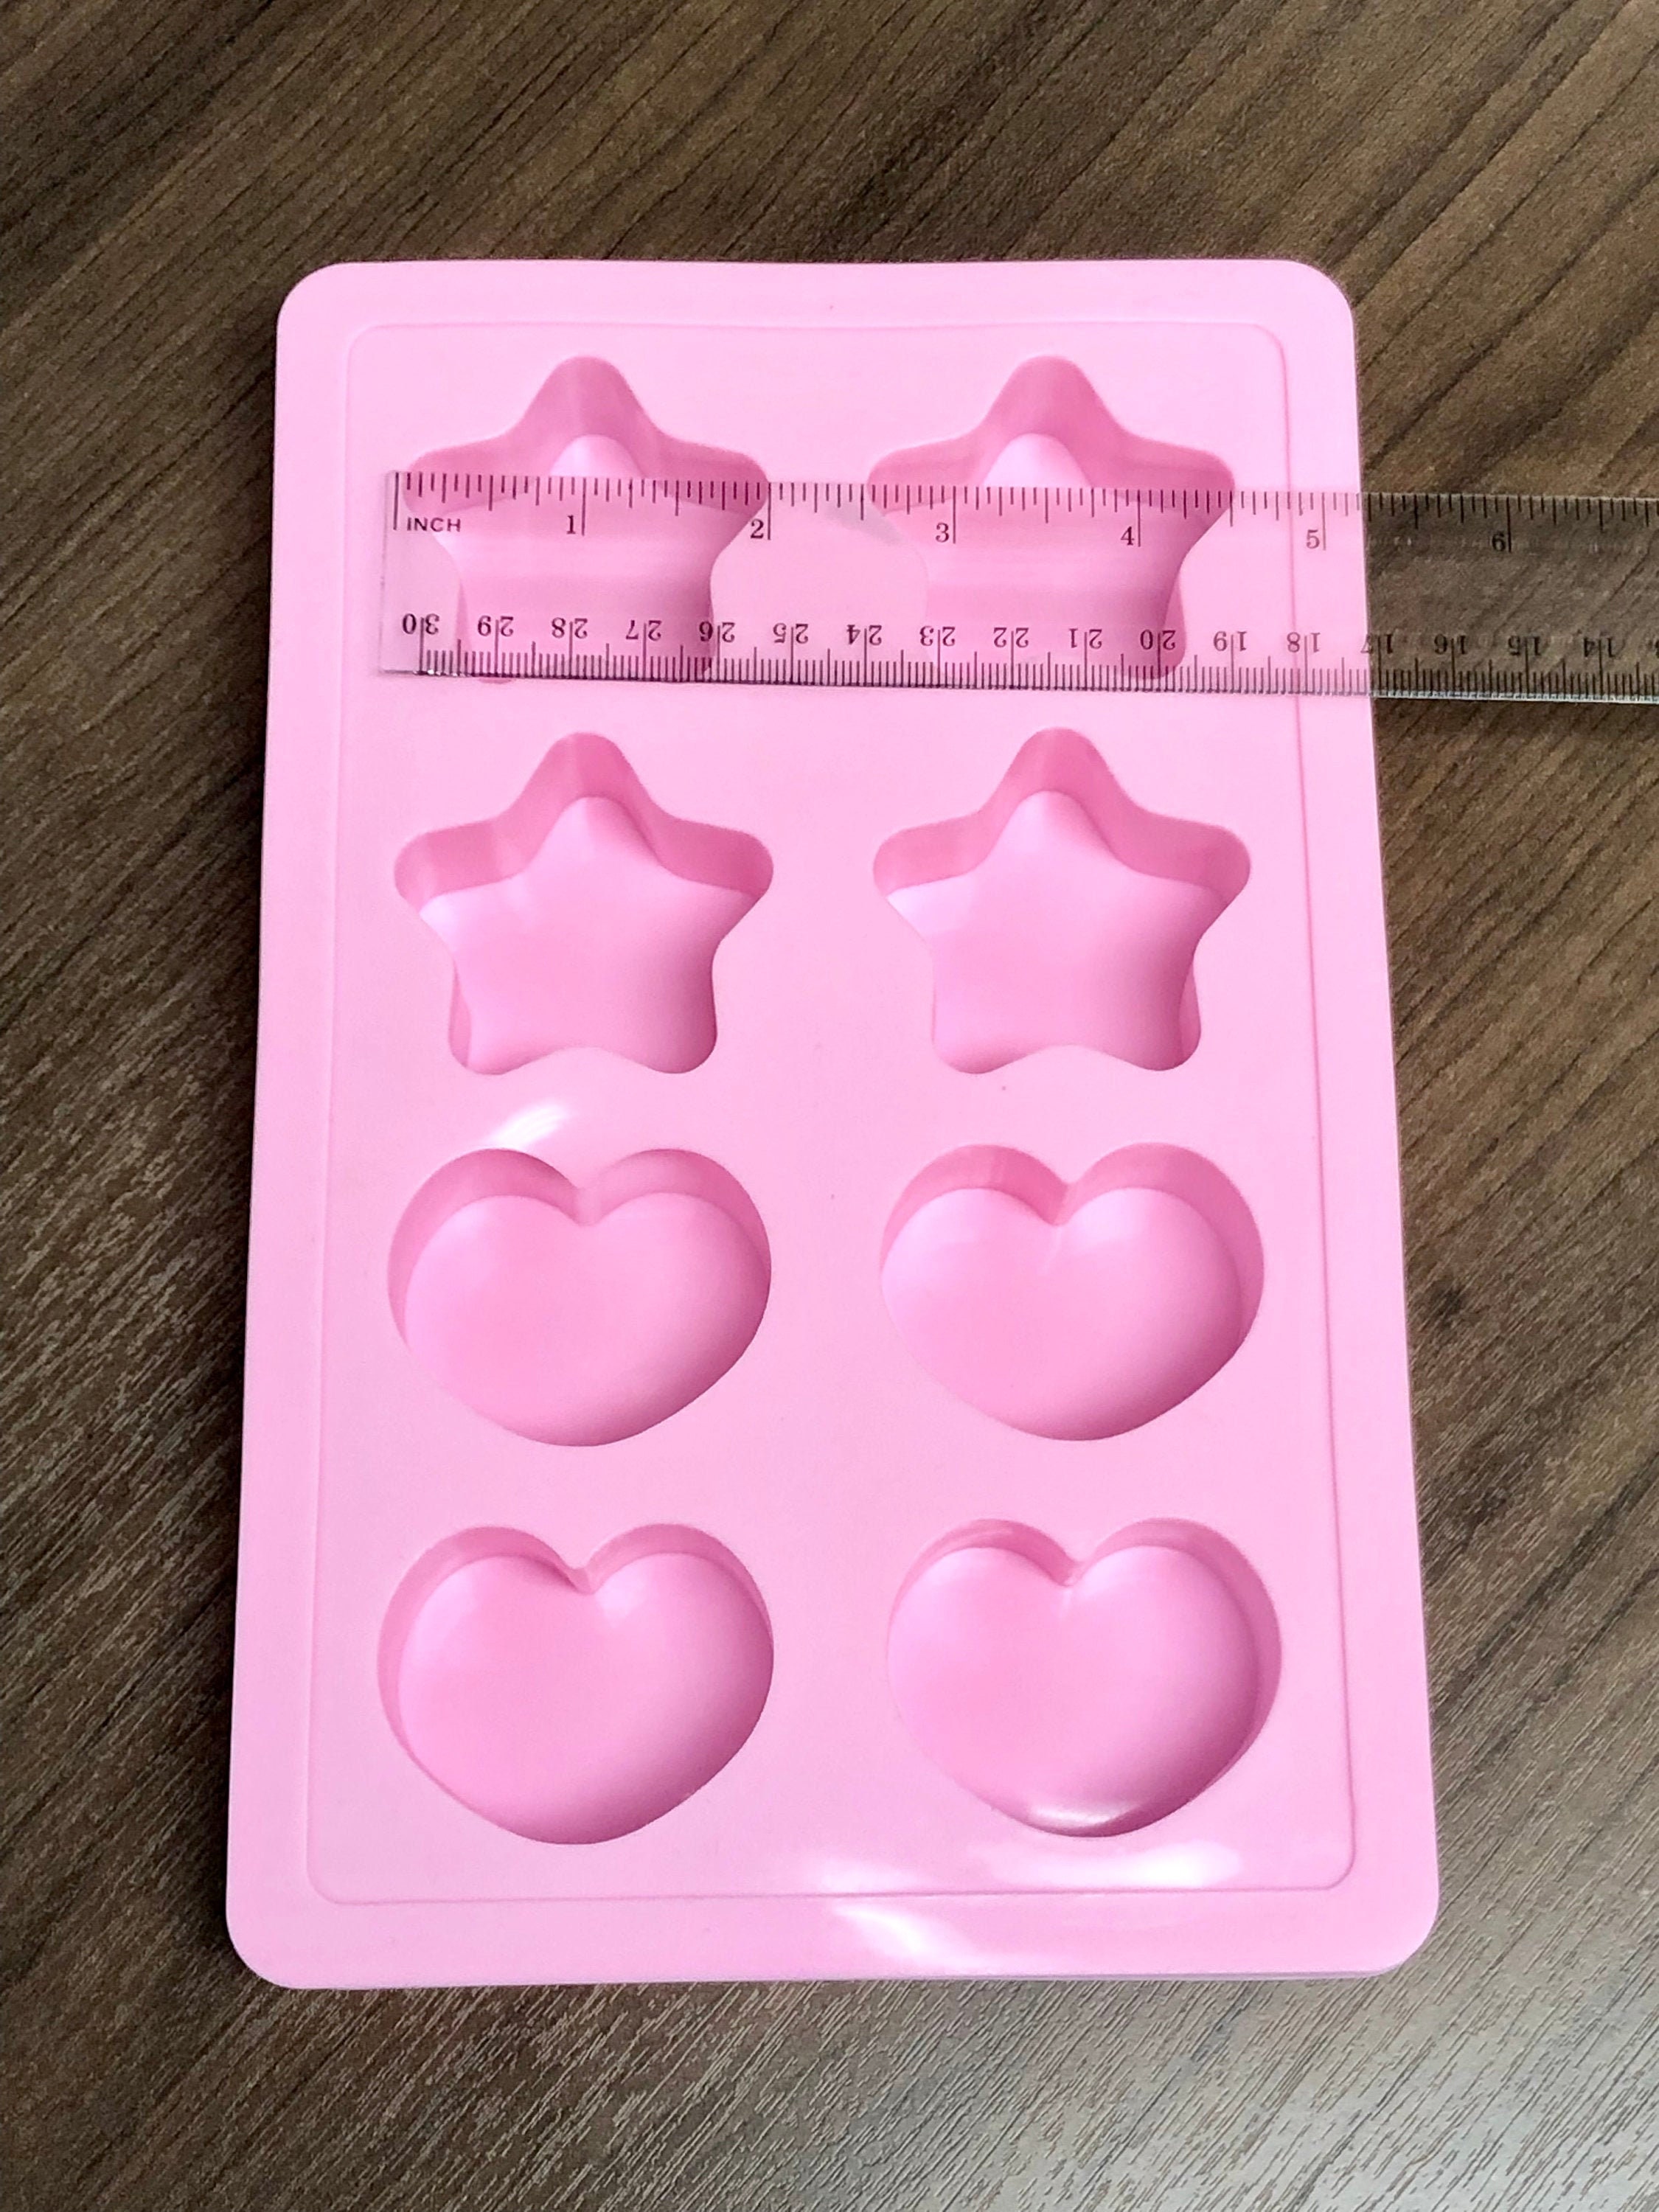 8 Cavity Silicone Heart Molds for Baking - Inspire Uplift